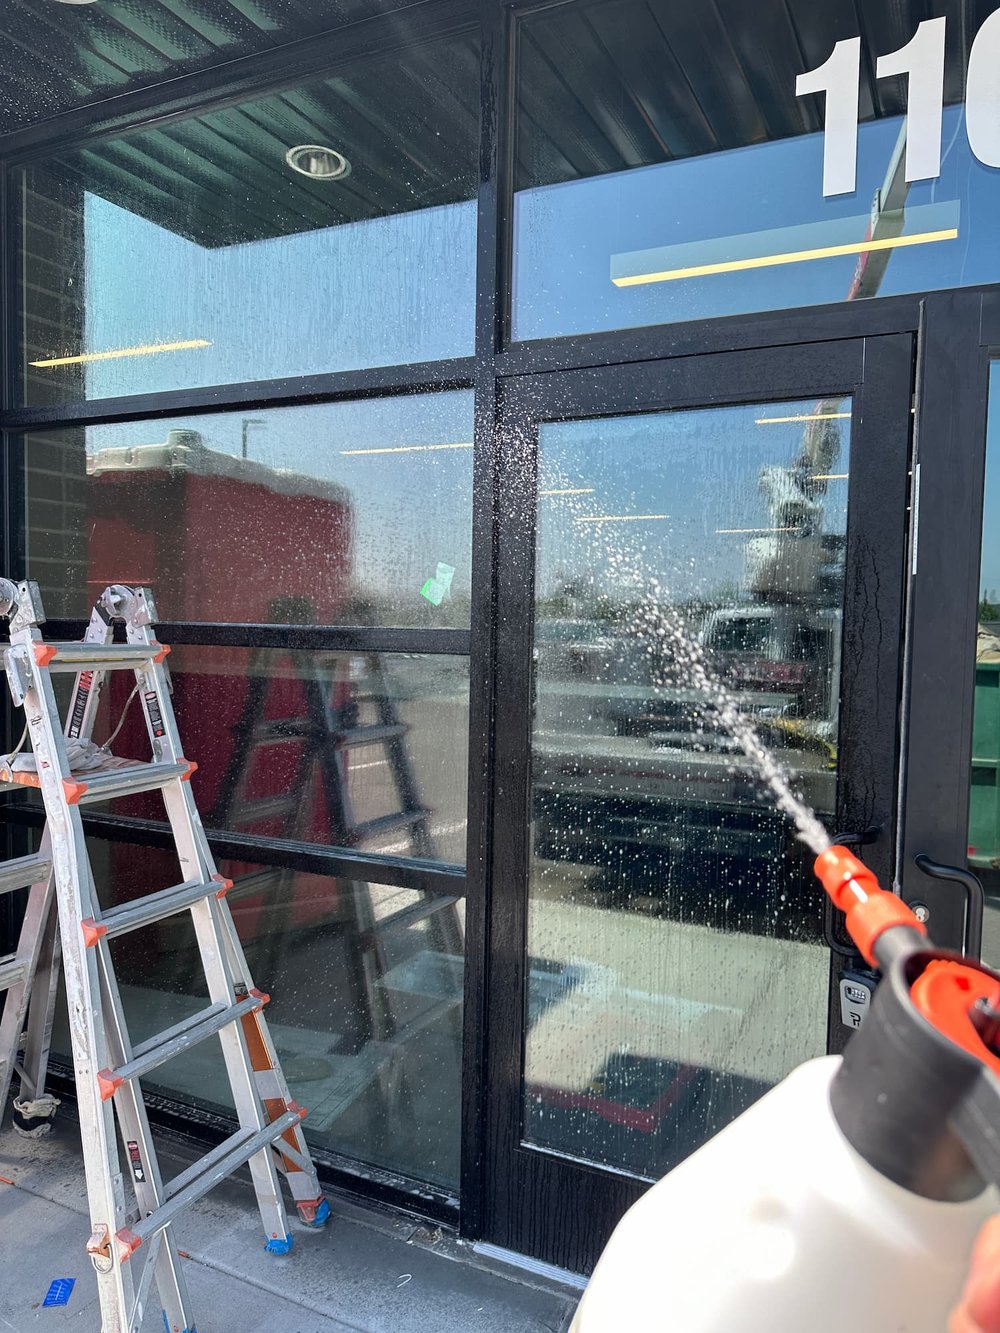 Cleaning the windows